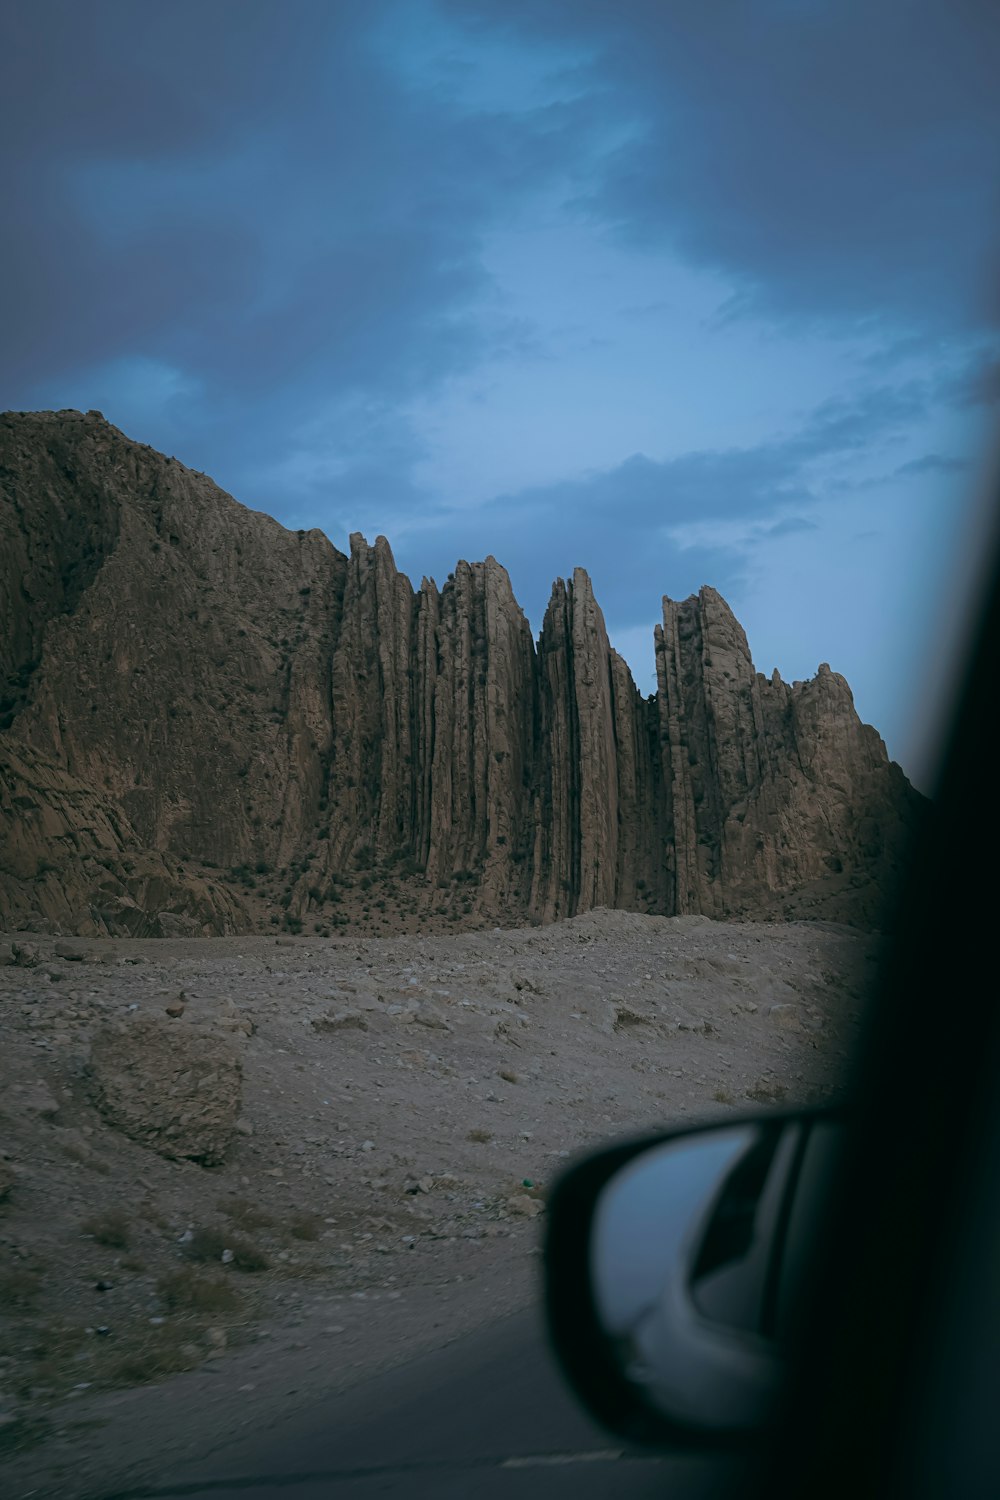 a view of a rocky outcropping in the desert